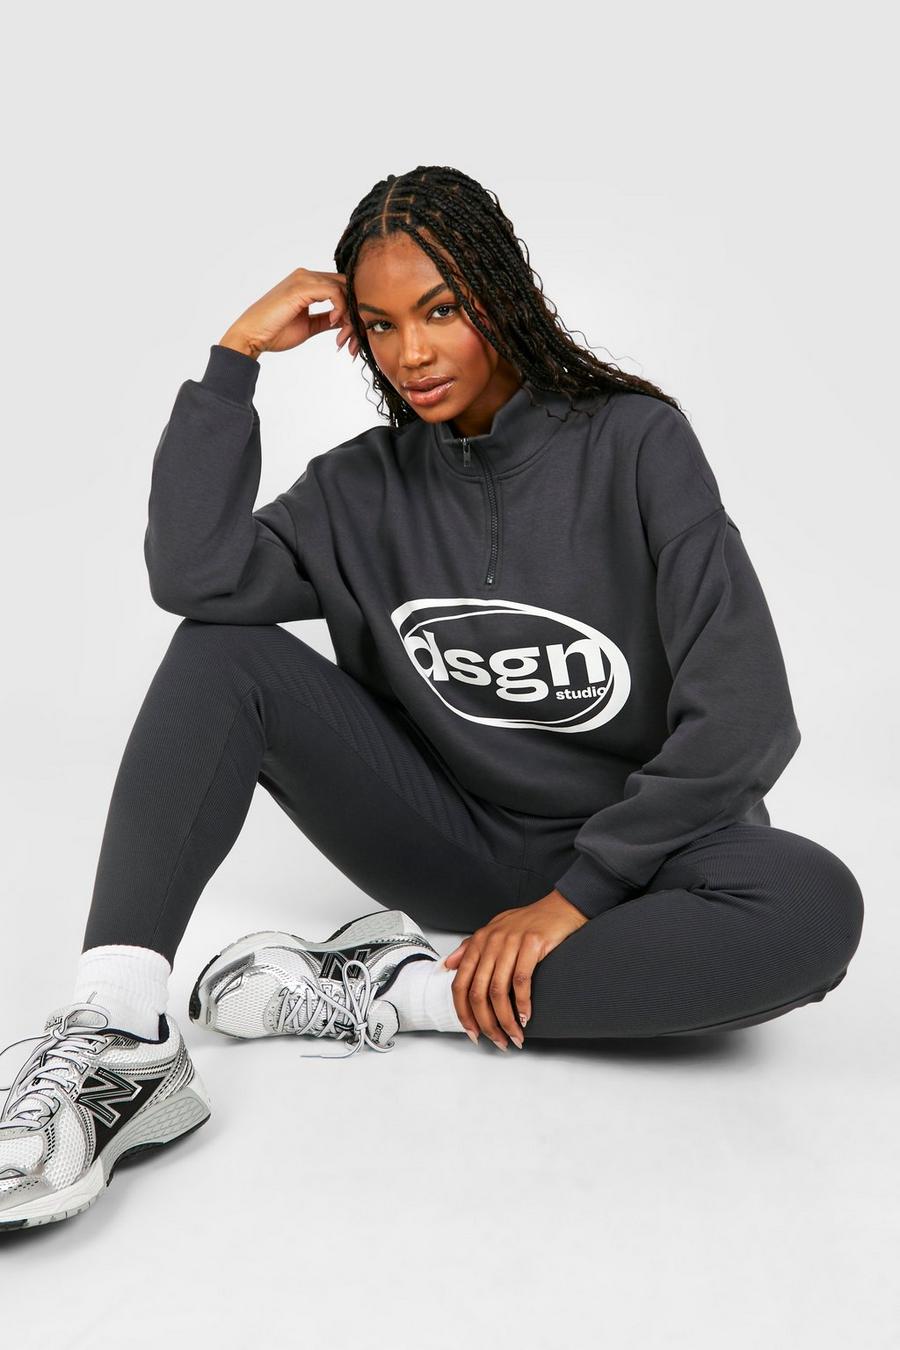 Charcoal Tall Dsgn Studio Half Zip Sweater And Legging Set image number 1